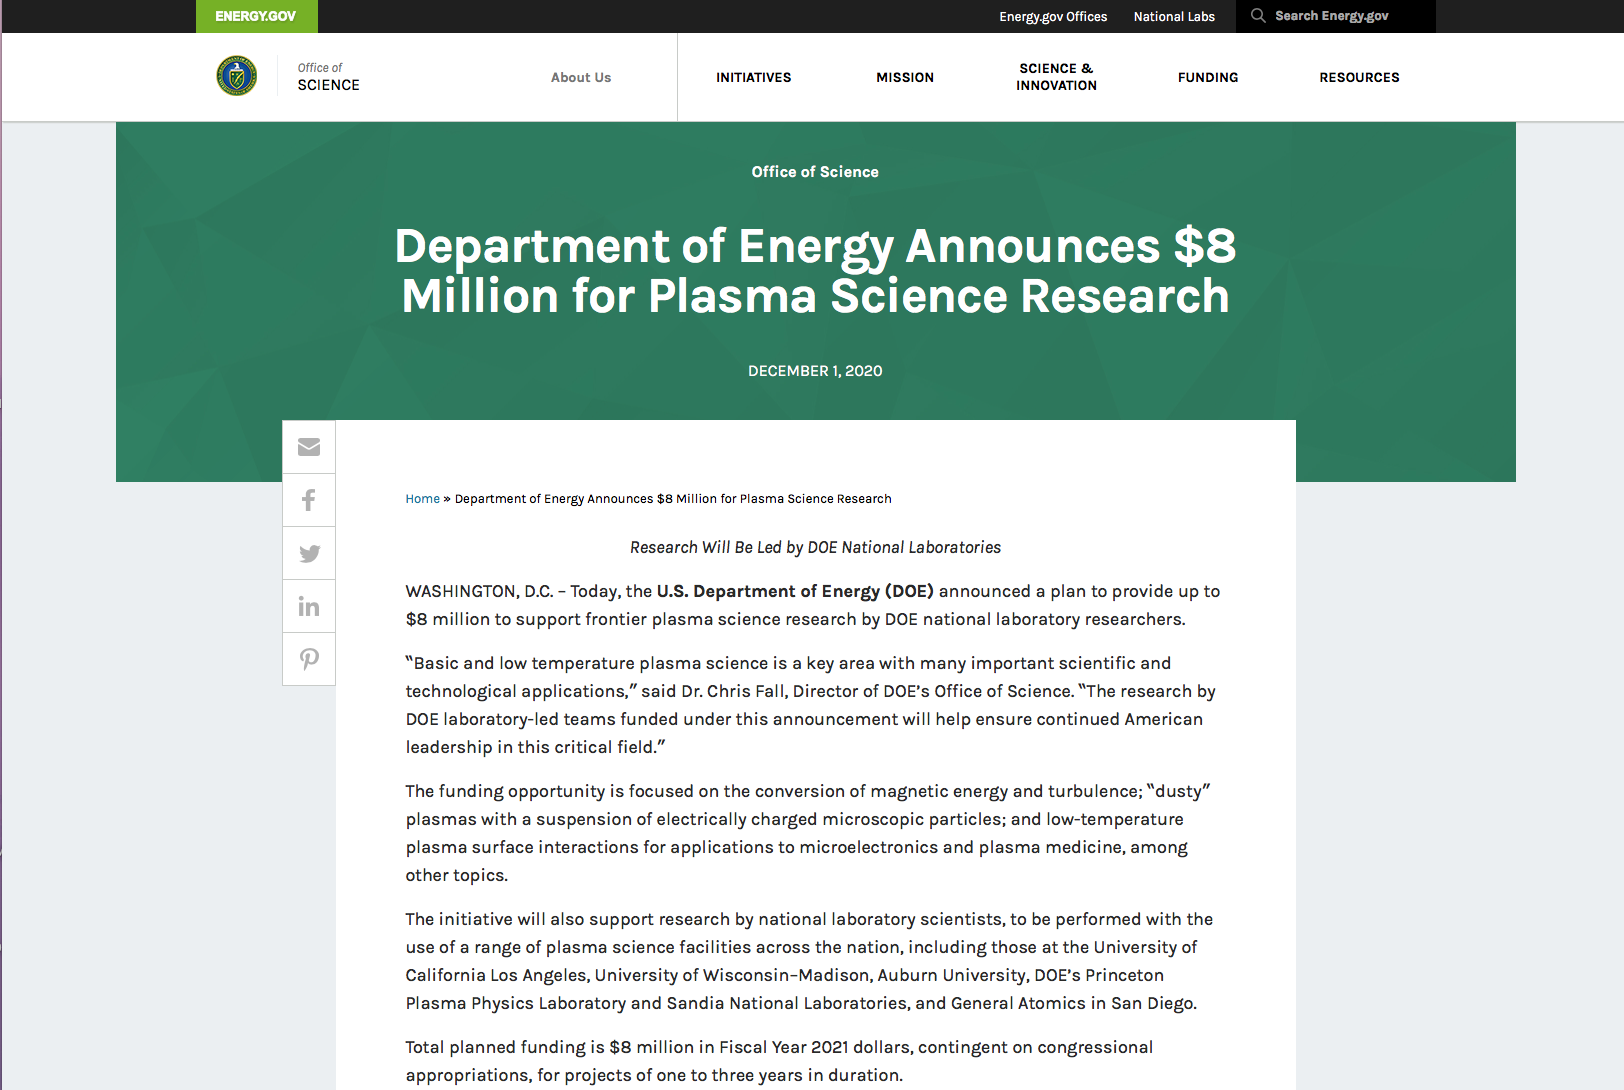 Department of Energy announces $8 million for plasma science research